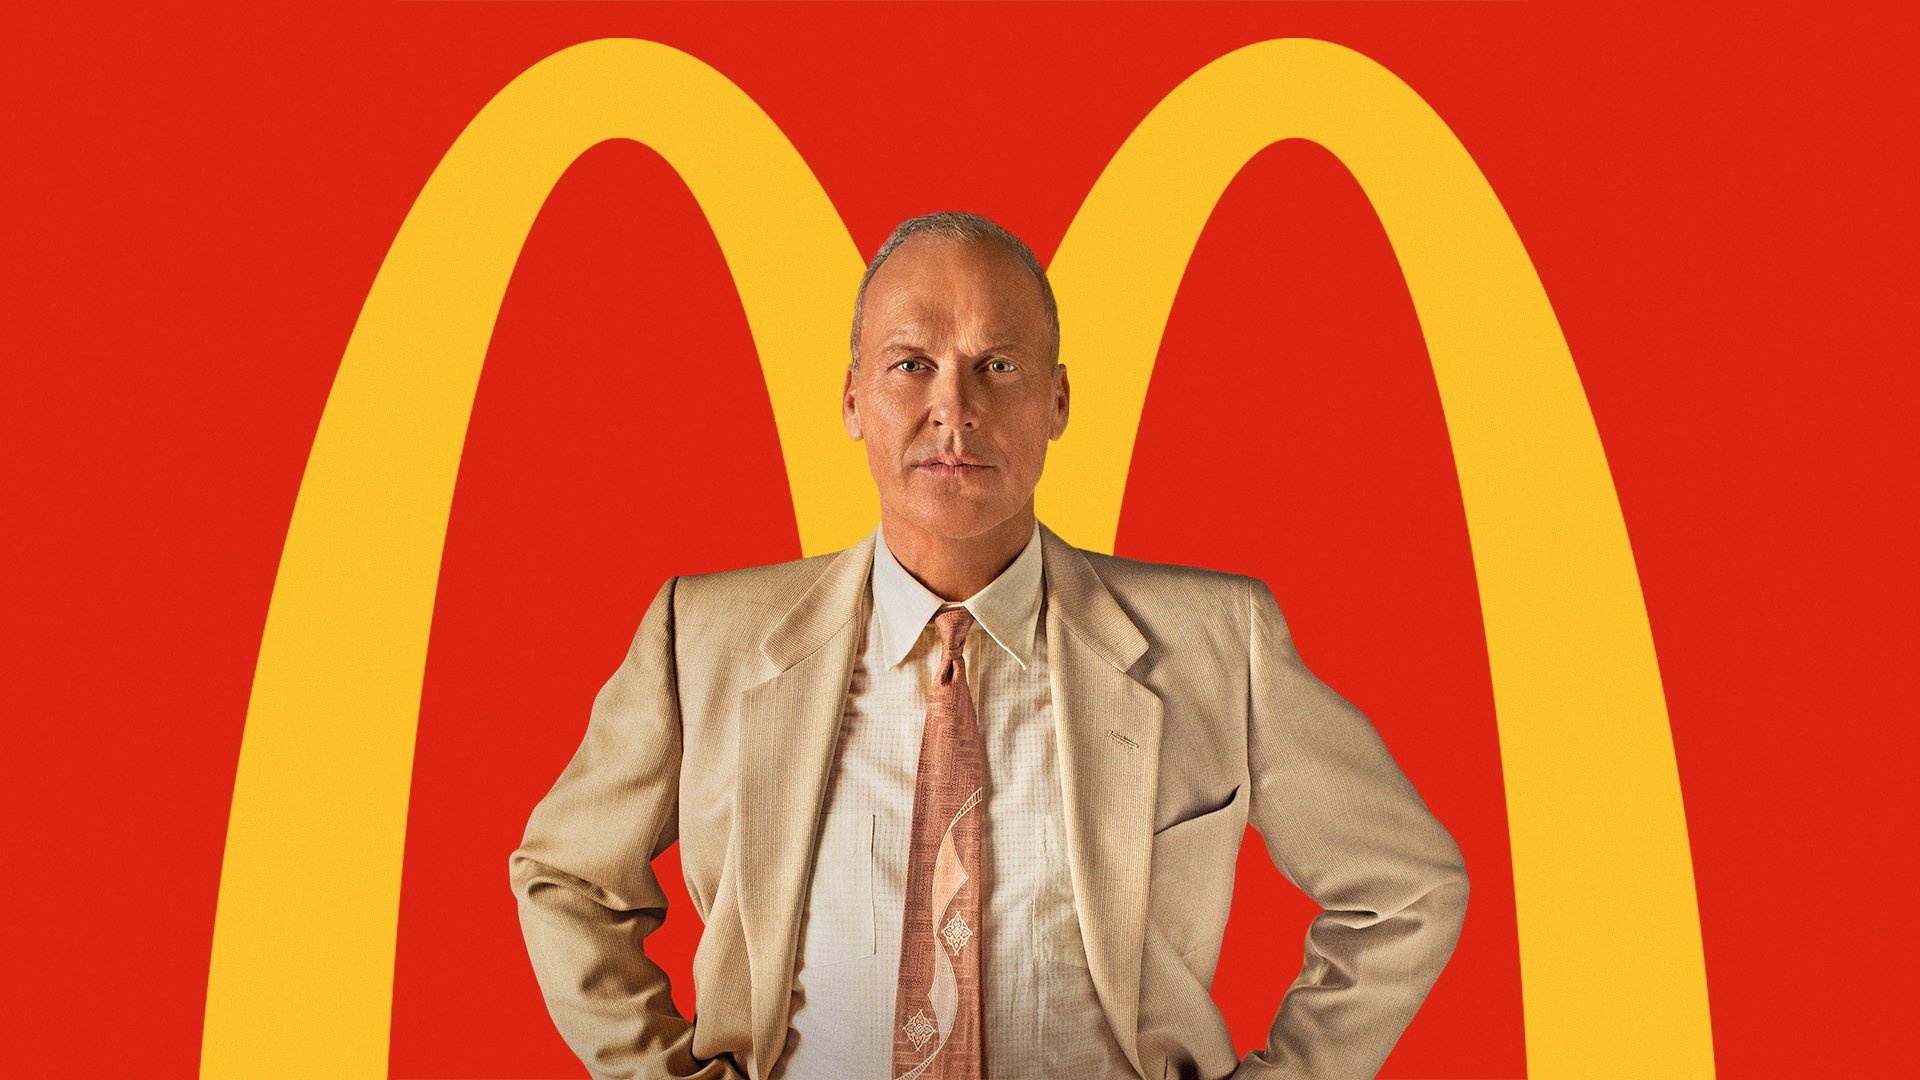 The Founder (2016) Movie, Top free wallpapers, Inspirational story, 1920x1080 Full HD Desktop